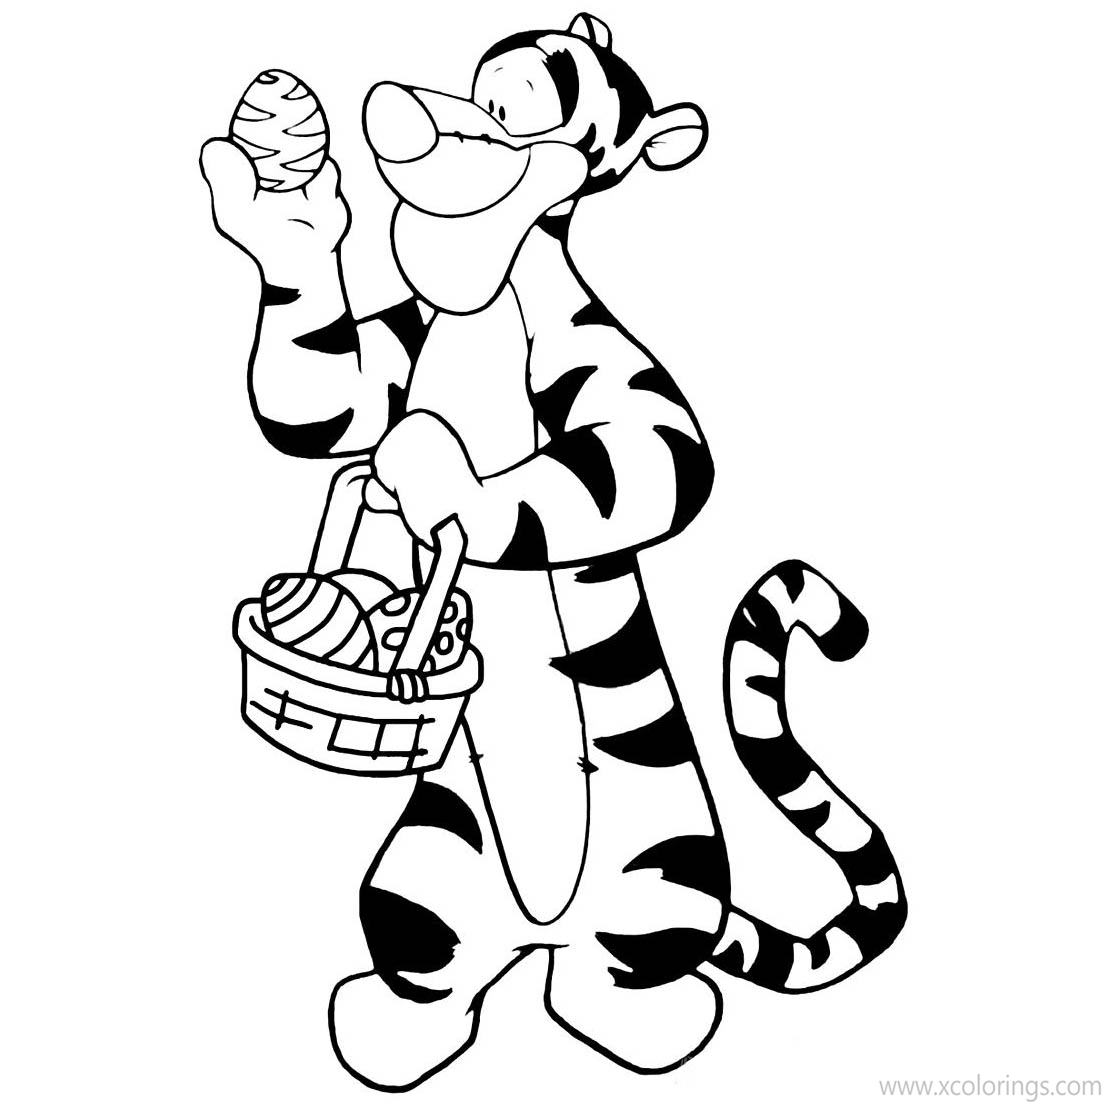 Free Disney Winnie The Pooh Easter Coloring Pages Tigger with An Egg printable